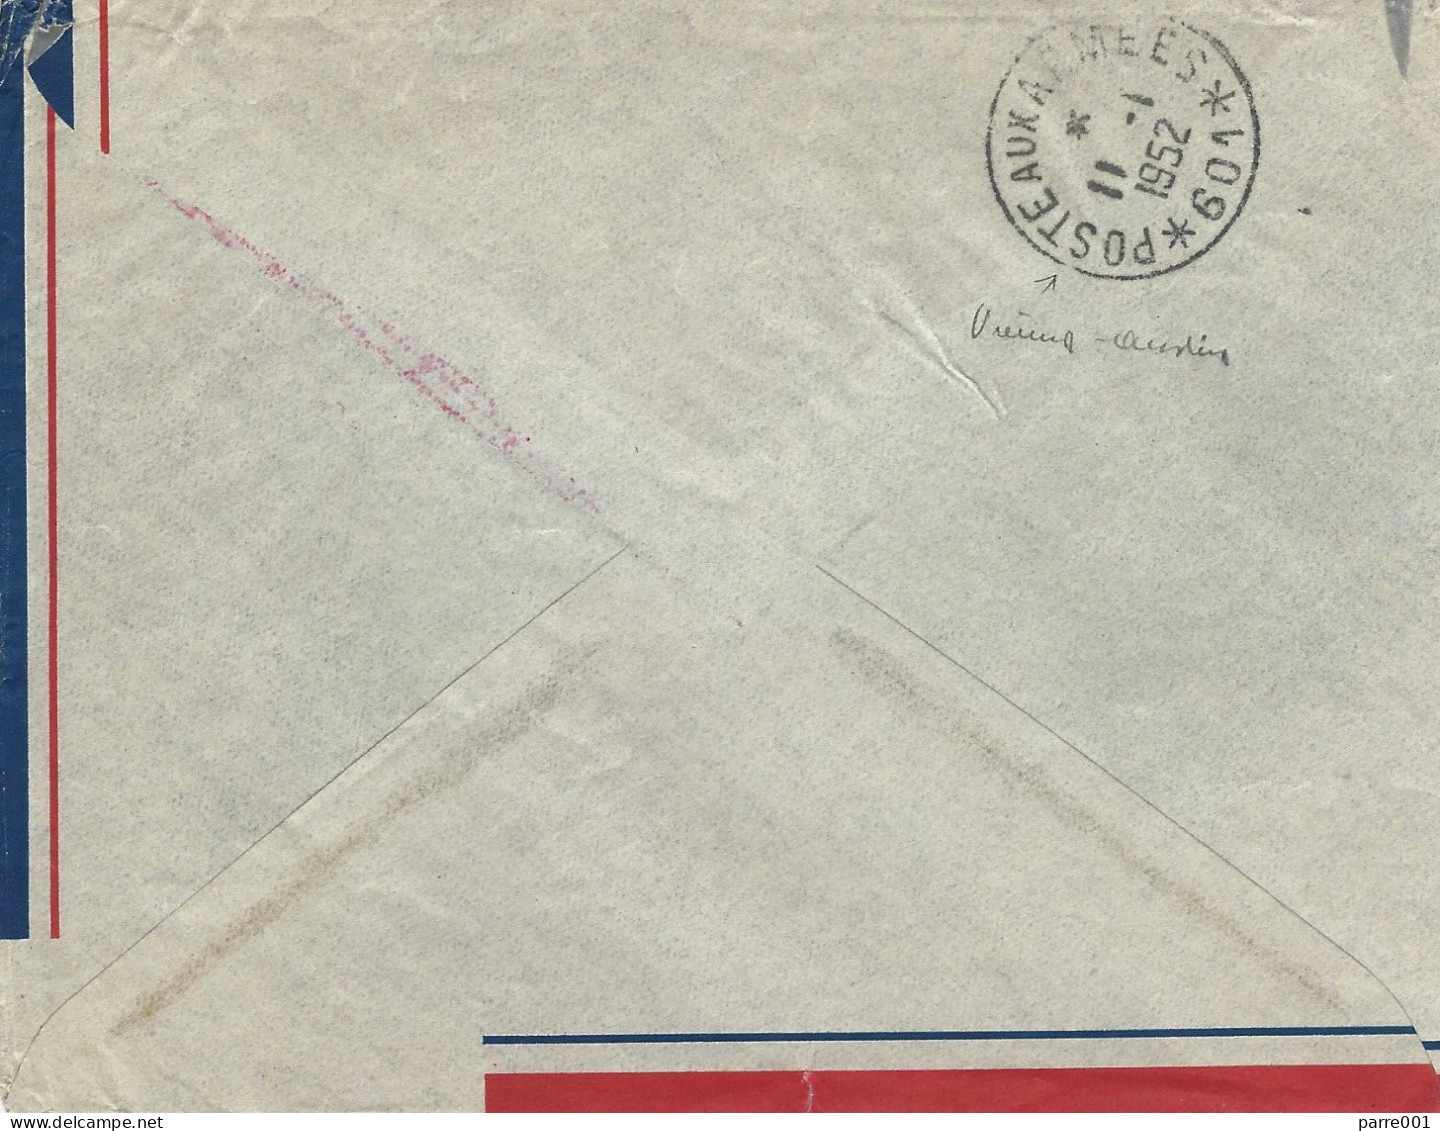 France 1952 Poste Aux Armees  T.O.E Indochine To BMP 601 Vienna Austria French Occupation Forces T.O.A. Official Cover - Vietnamkrieg/Indochinakrieg